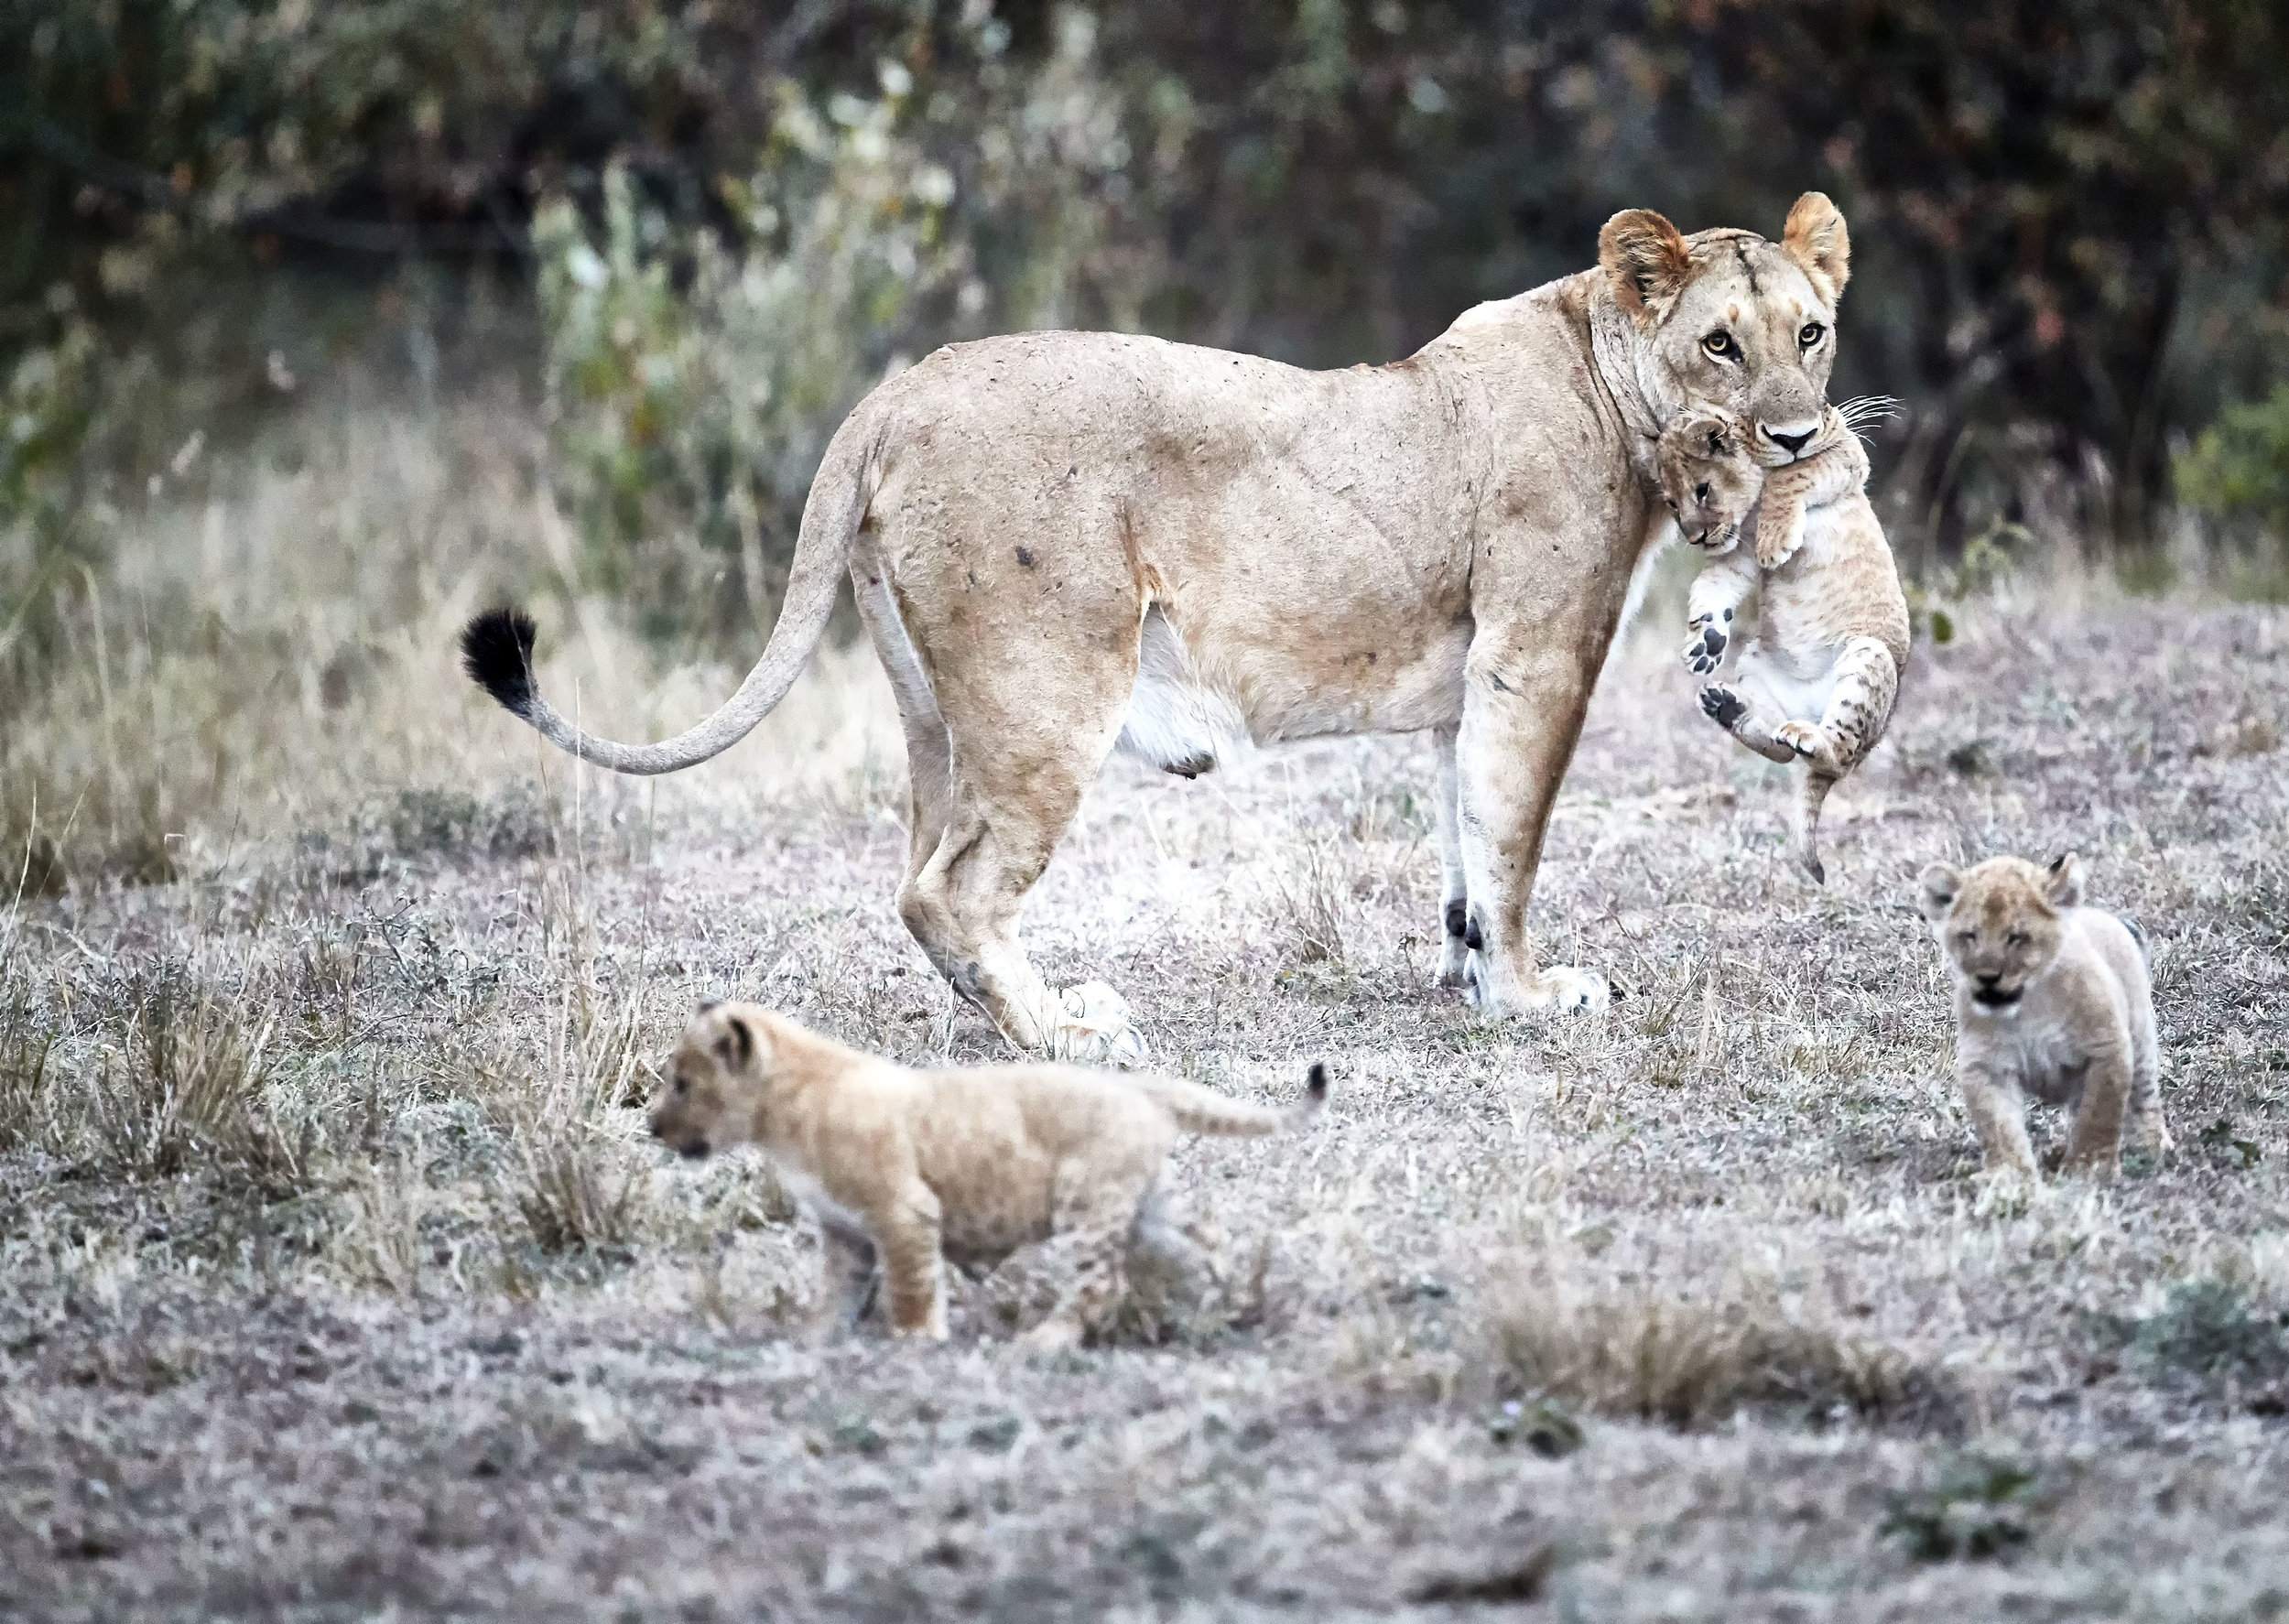 Female with Cubs in Tow Kenya